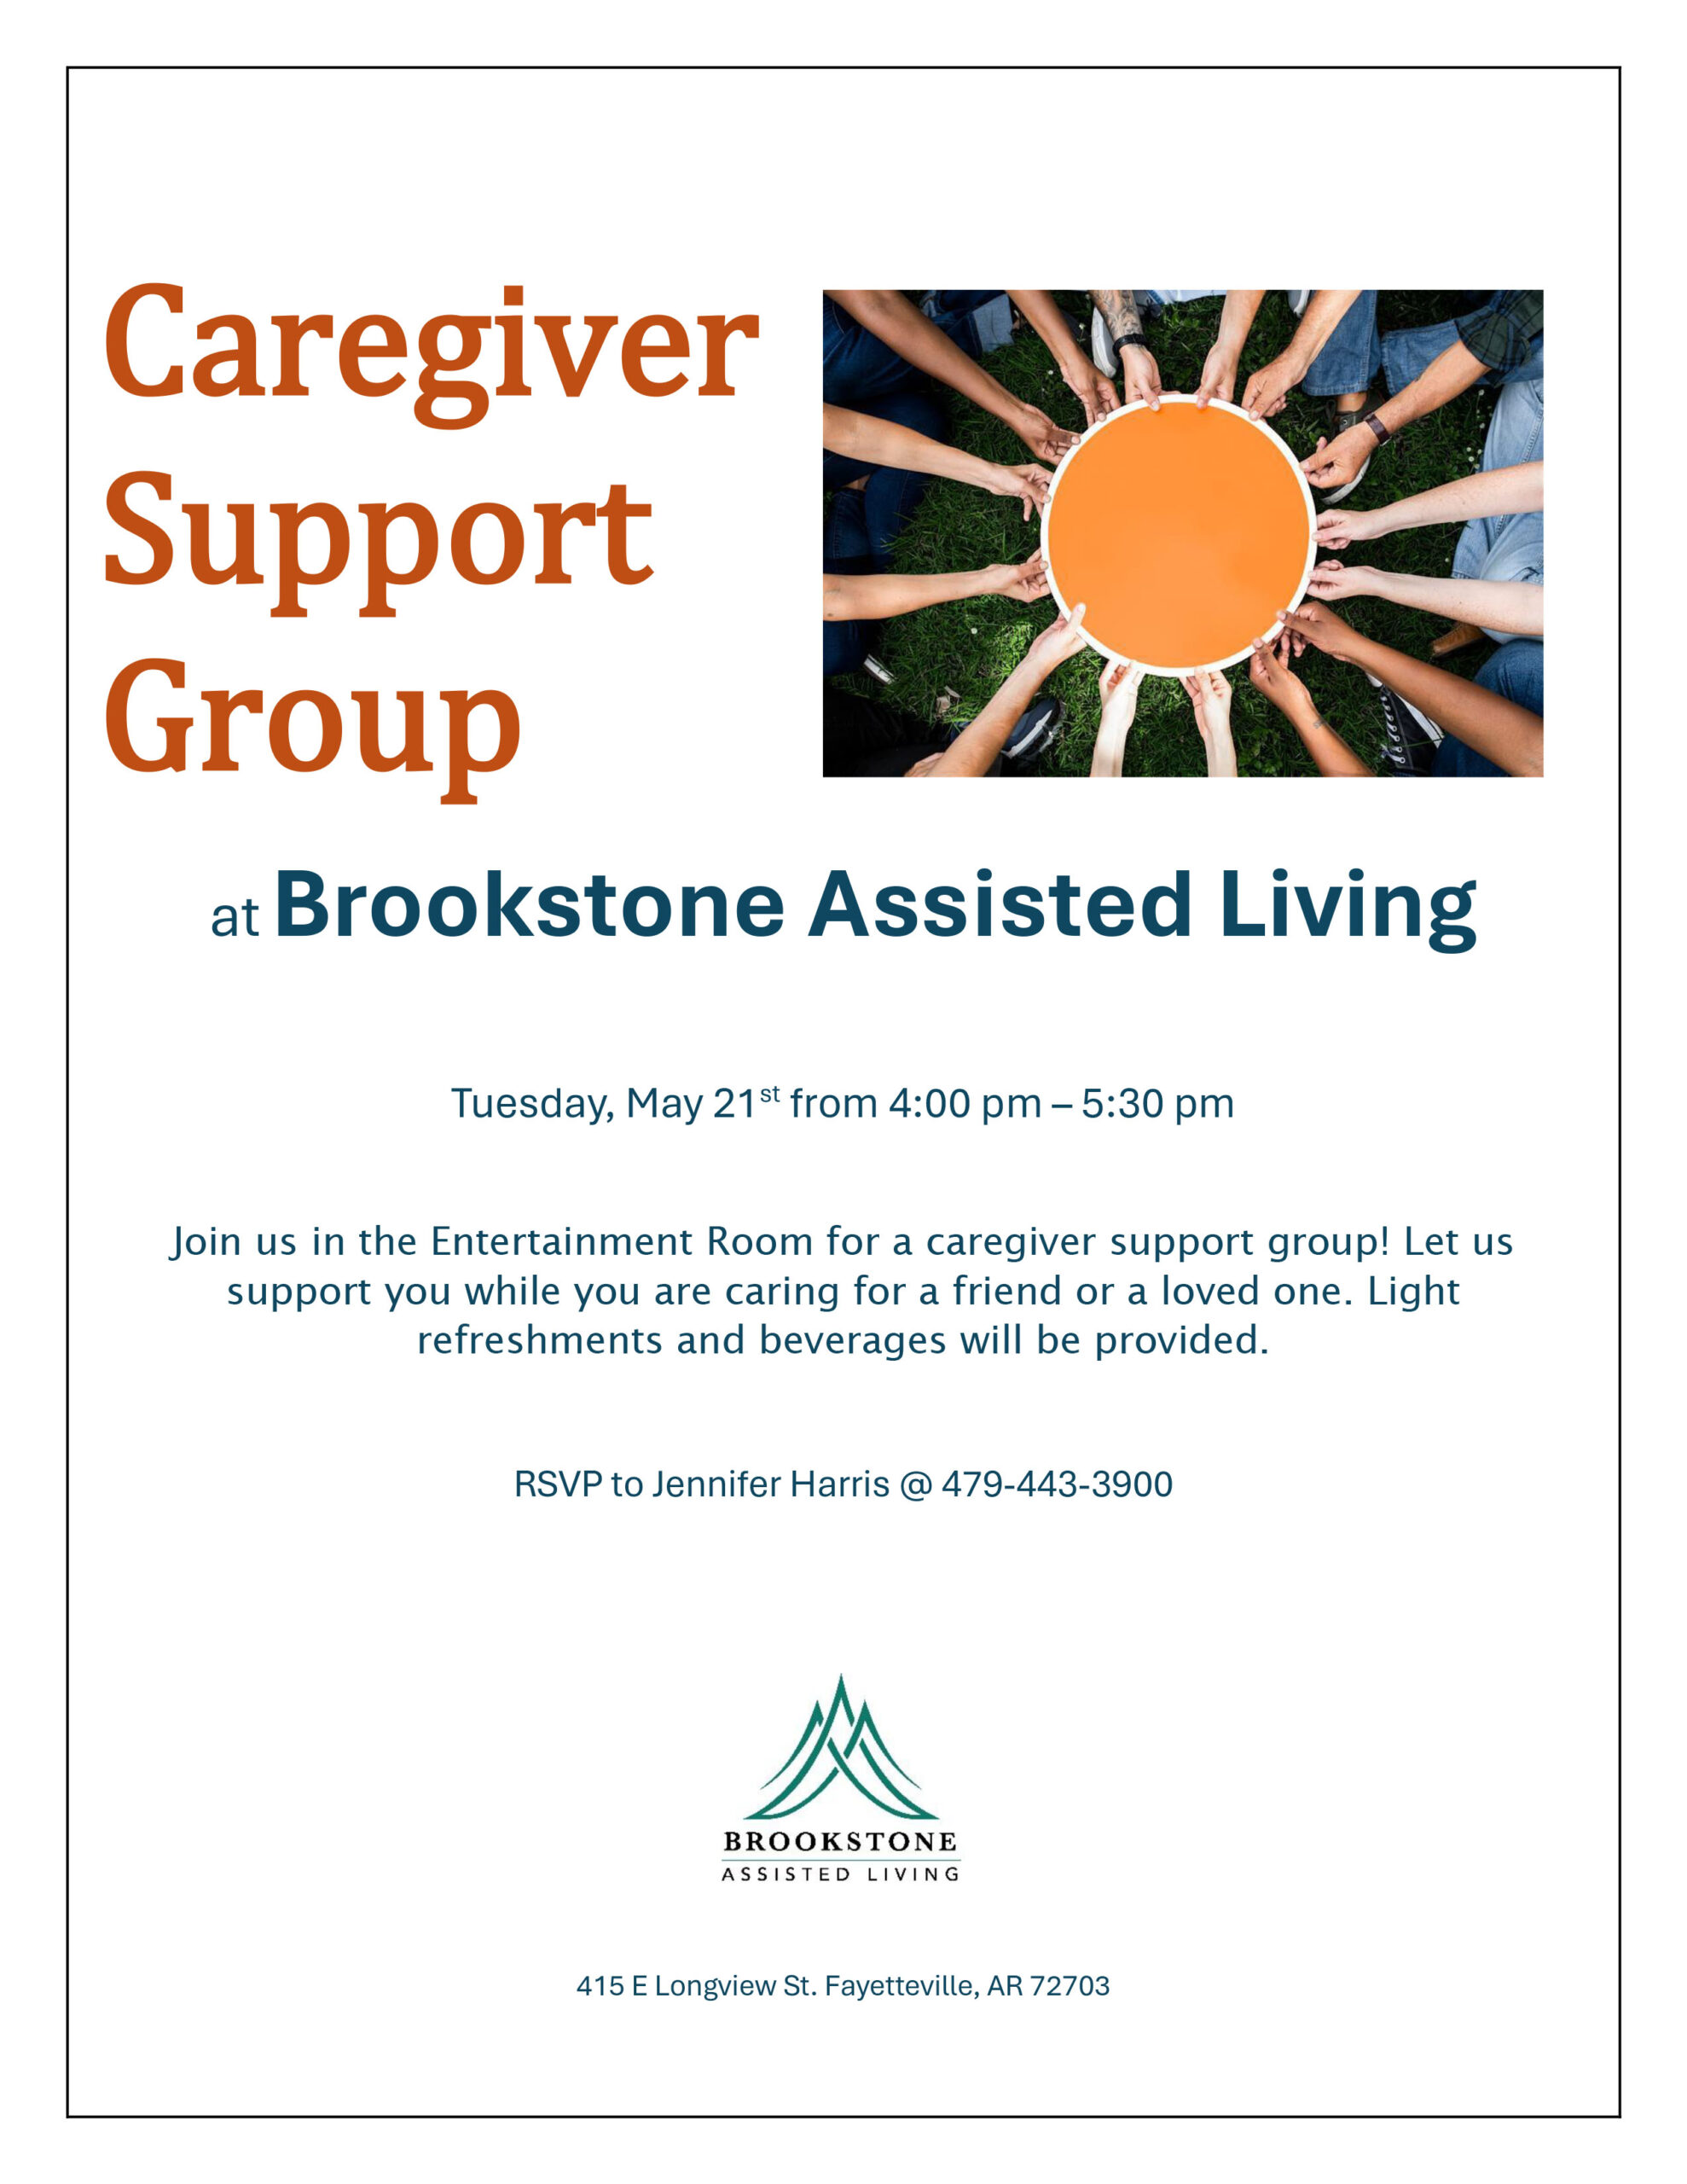 Brookstone Assisted Living & Enhanced Care - Caregiver Support Group